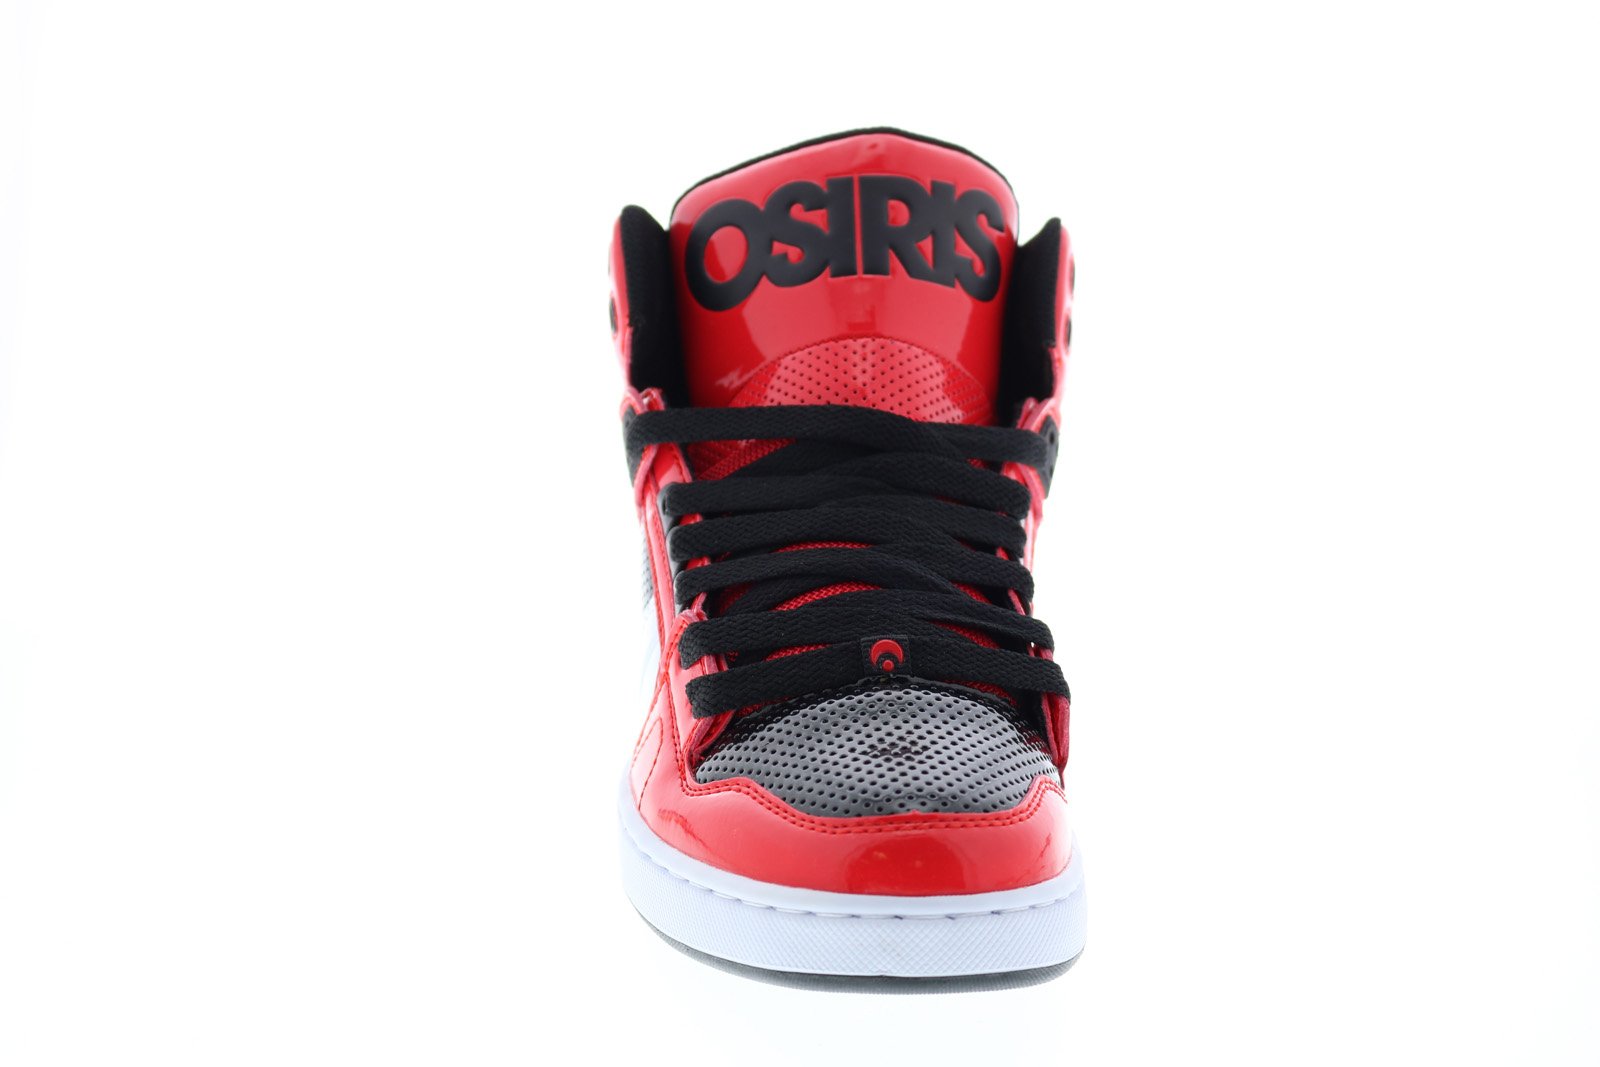 Osiris Nyc 83 Clk 1343 706 Mens Red Synthetic Skate Inspired 